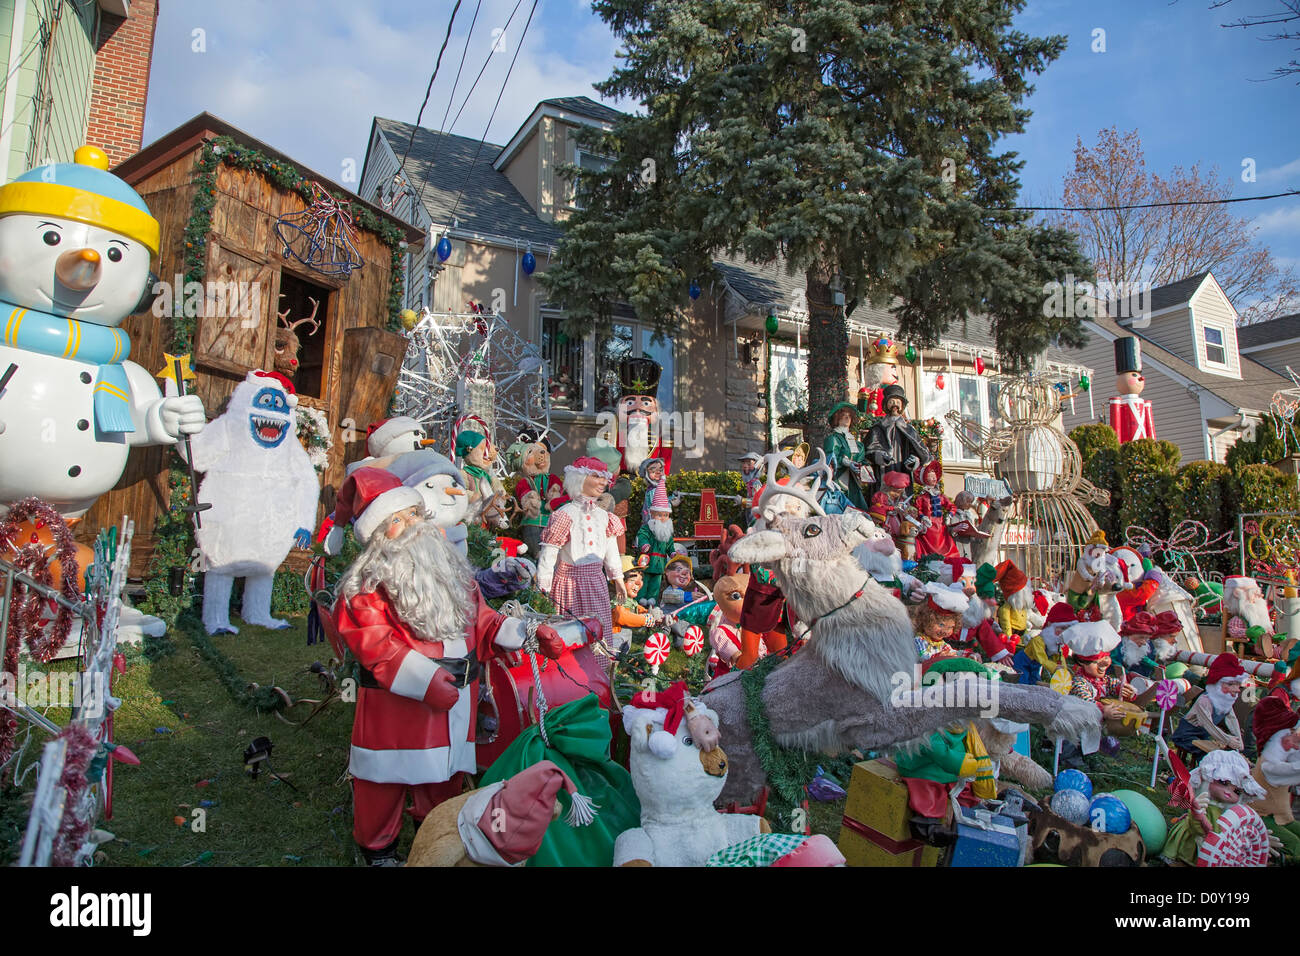 New York, New York - A Christmas display on the lawn of a home on Staten Island. Stock Photo